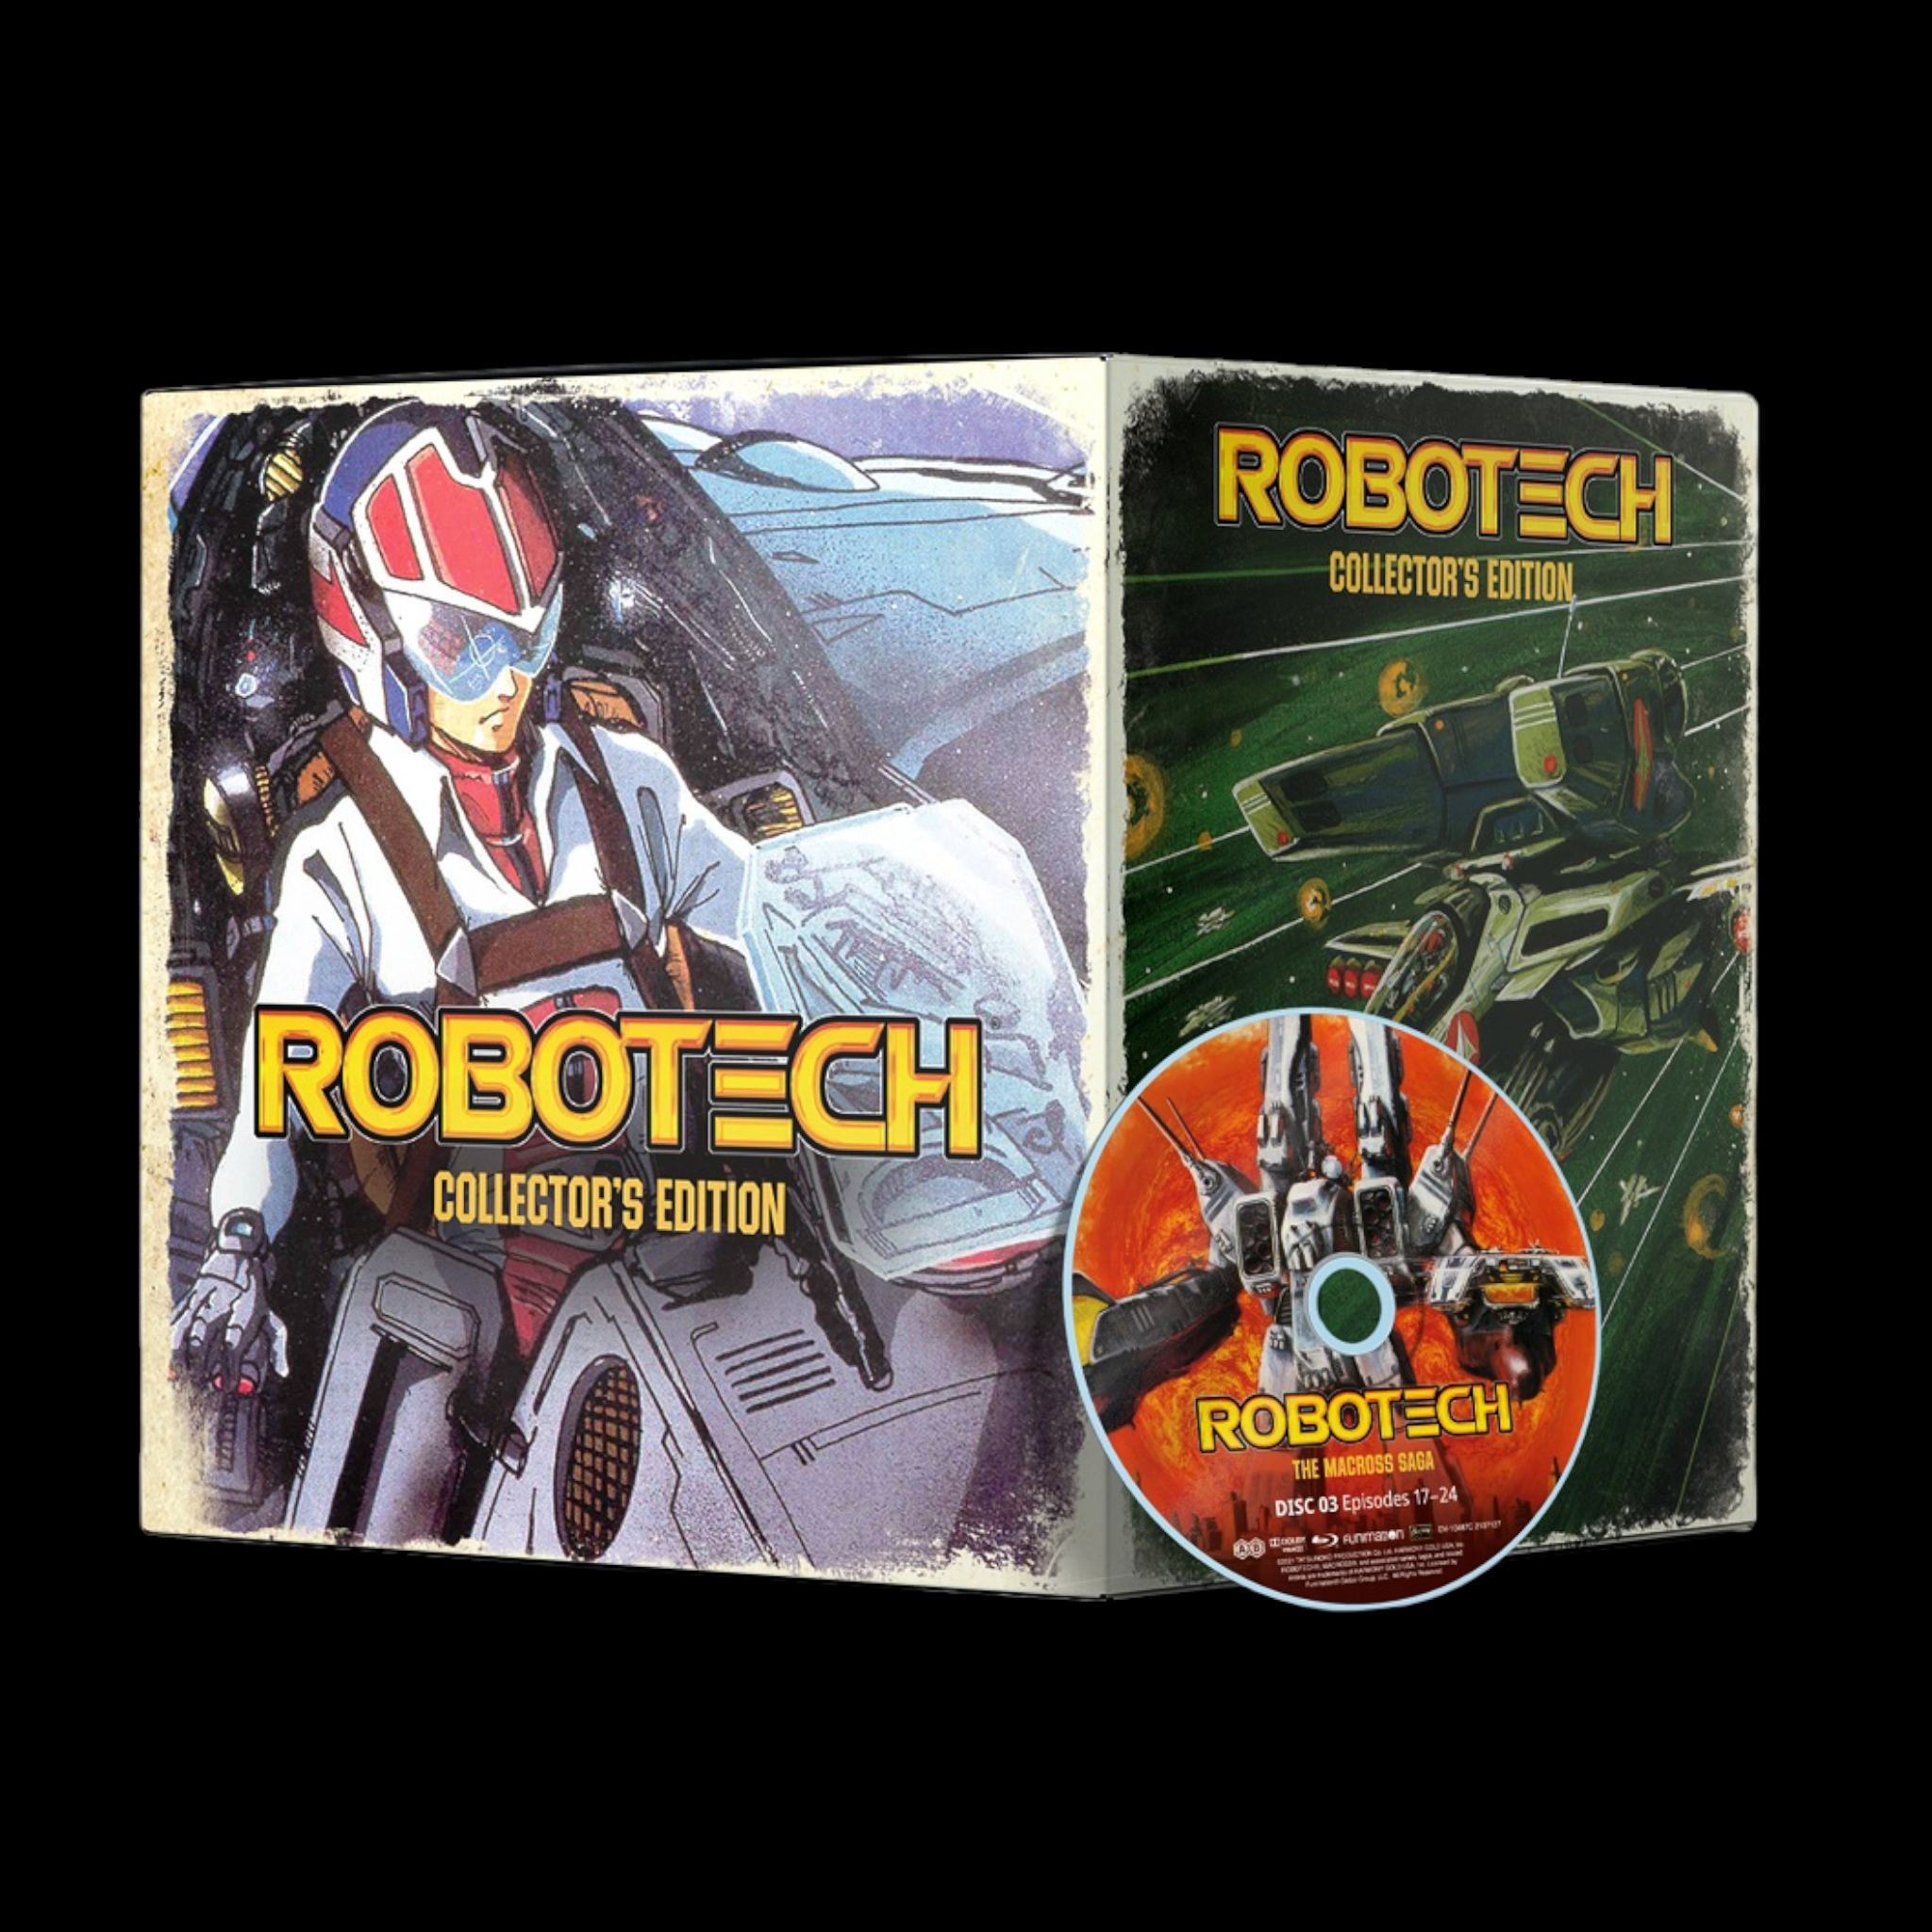 Robotech The Complete Series Collector's Edition Blu-ray